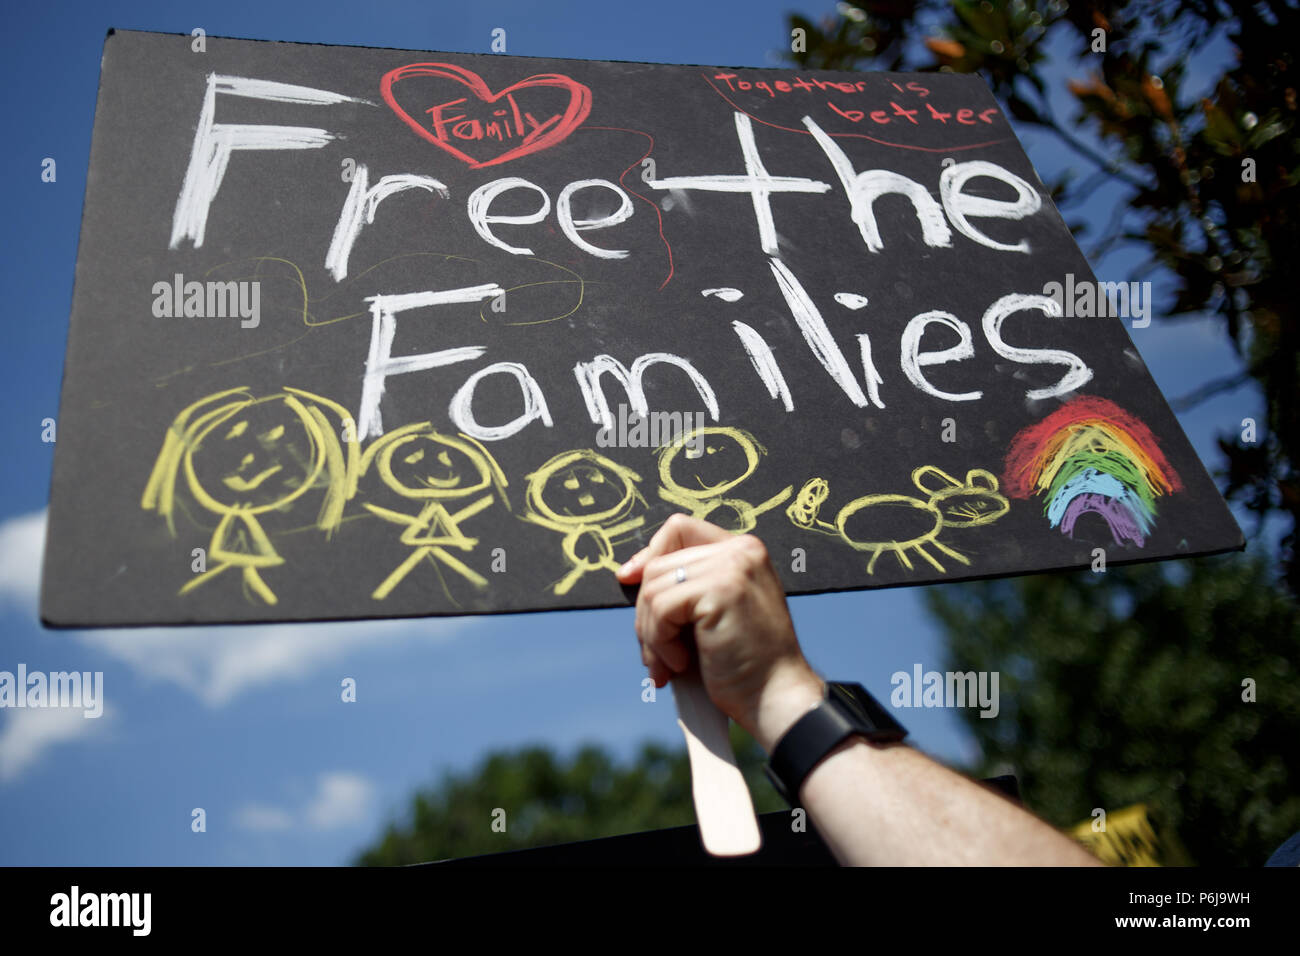 June 30, 2018 - Washington,District of Columbia, USA - Protestors gather in Lafayette Park, across from the White House, for the Families Belong Together rally. (Credit Image: © Michael Candelori via ZUMA Wire) Stock Photo